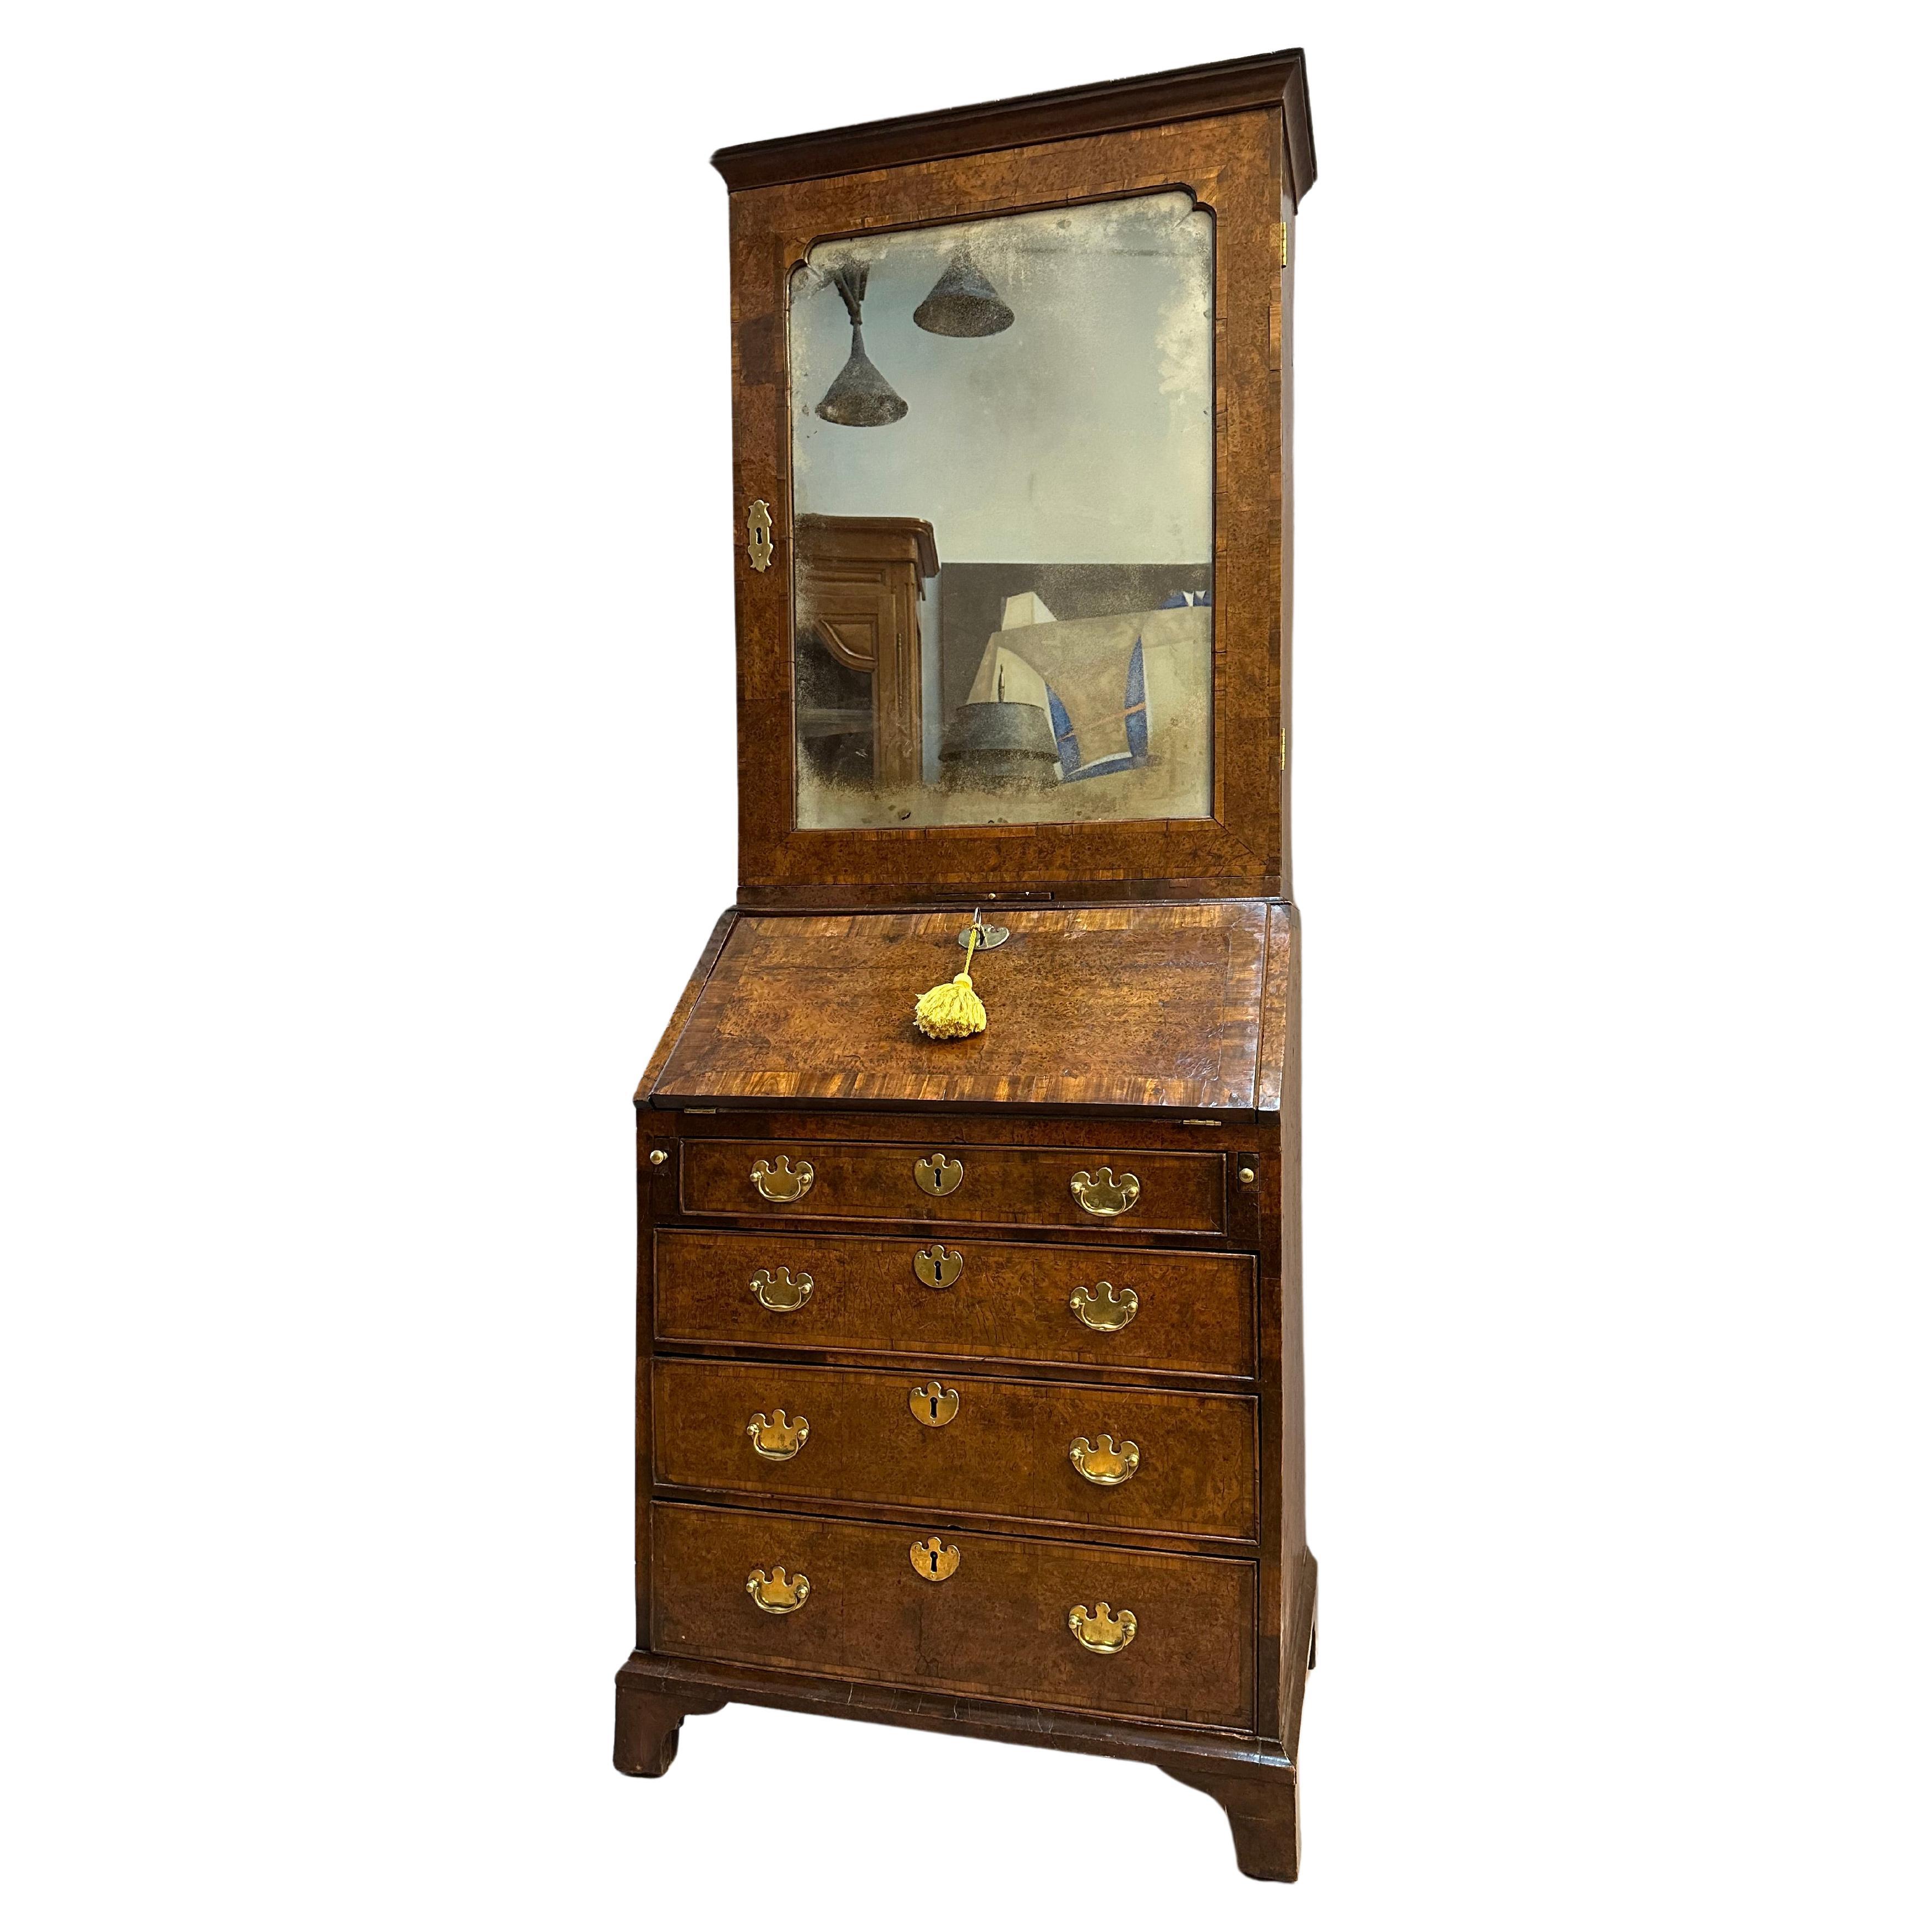 Extremely Rare Small Early 18th Century English Burled Yew Wood “Bureau Bookcase For Sale